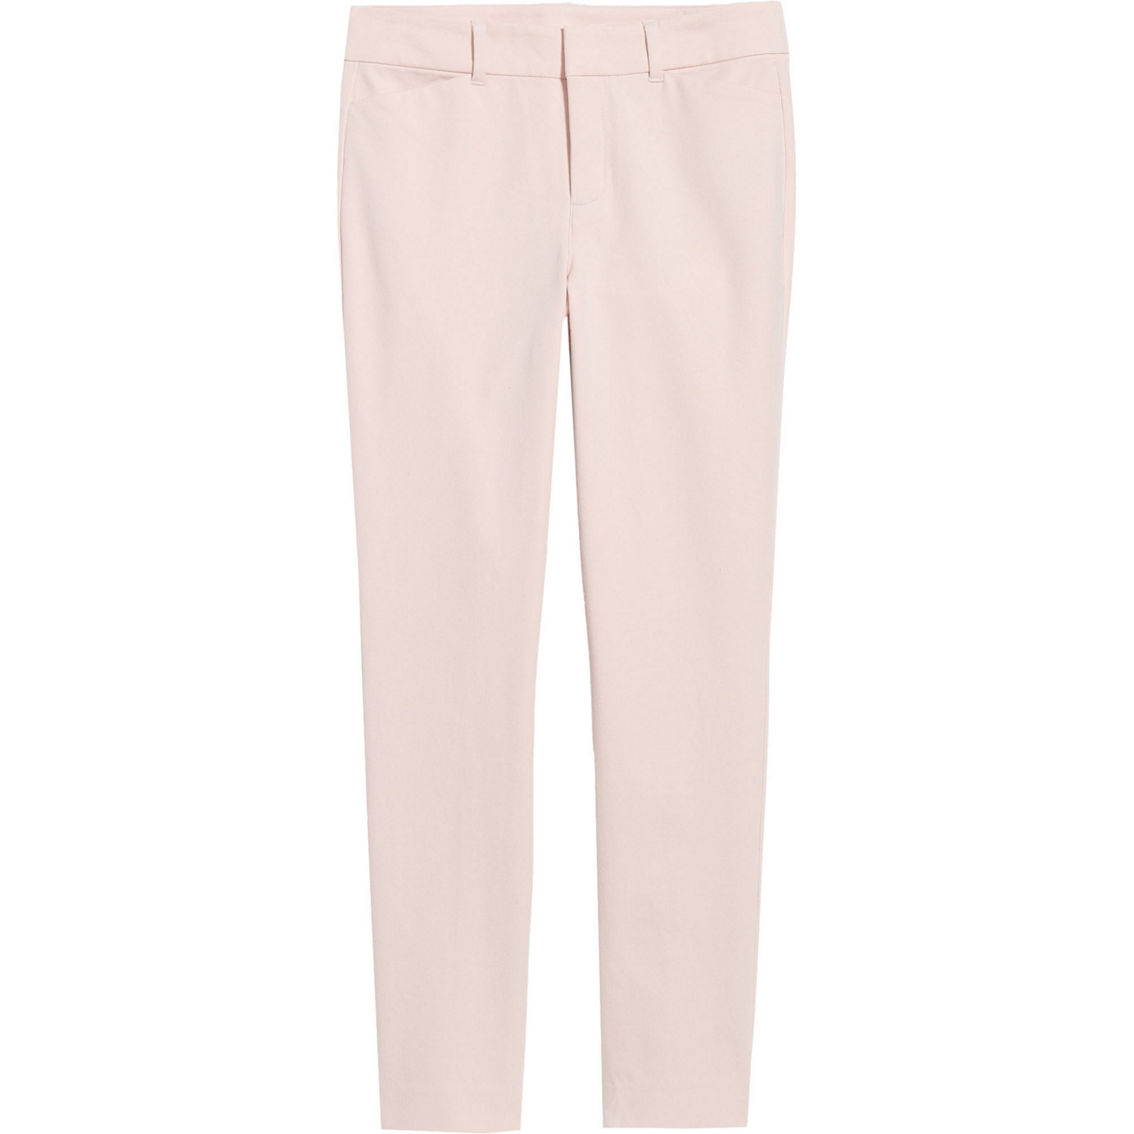 Old Navy High-Rise Pixie Ankle Pants - Image 3 of 3